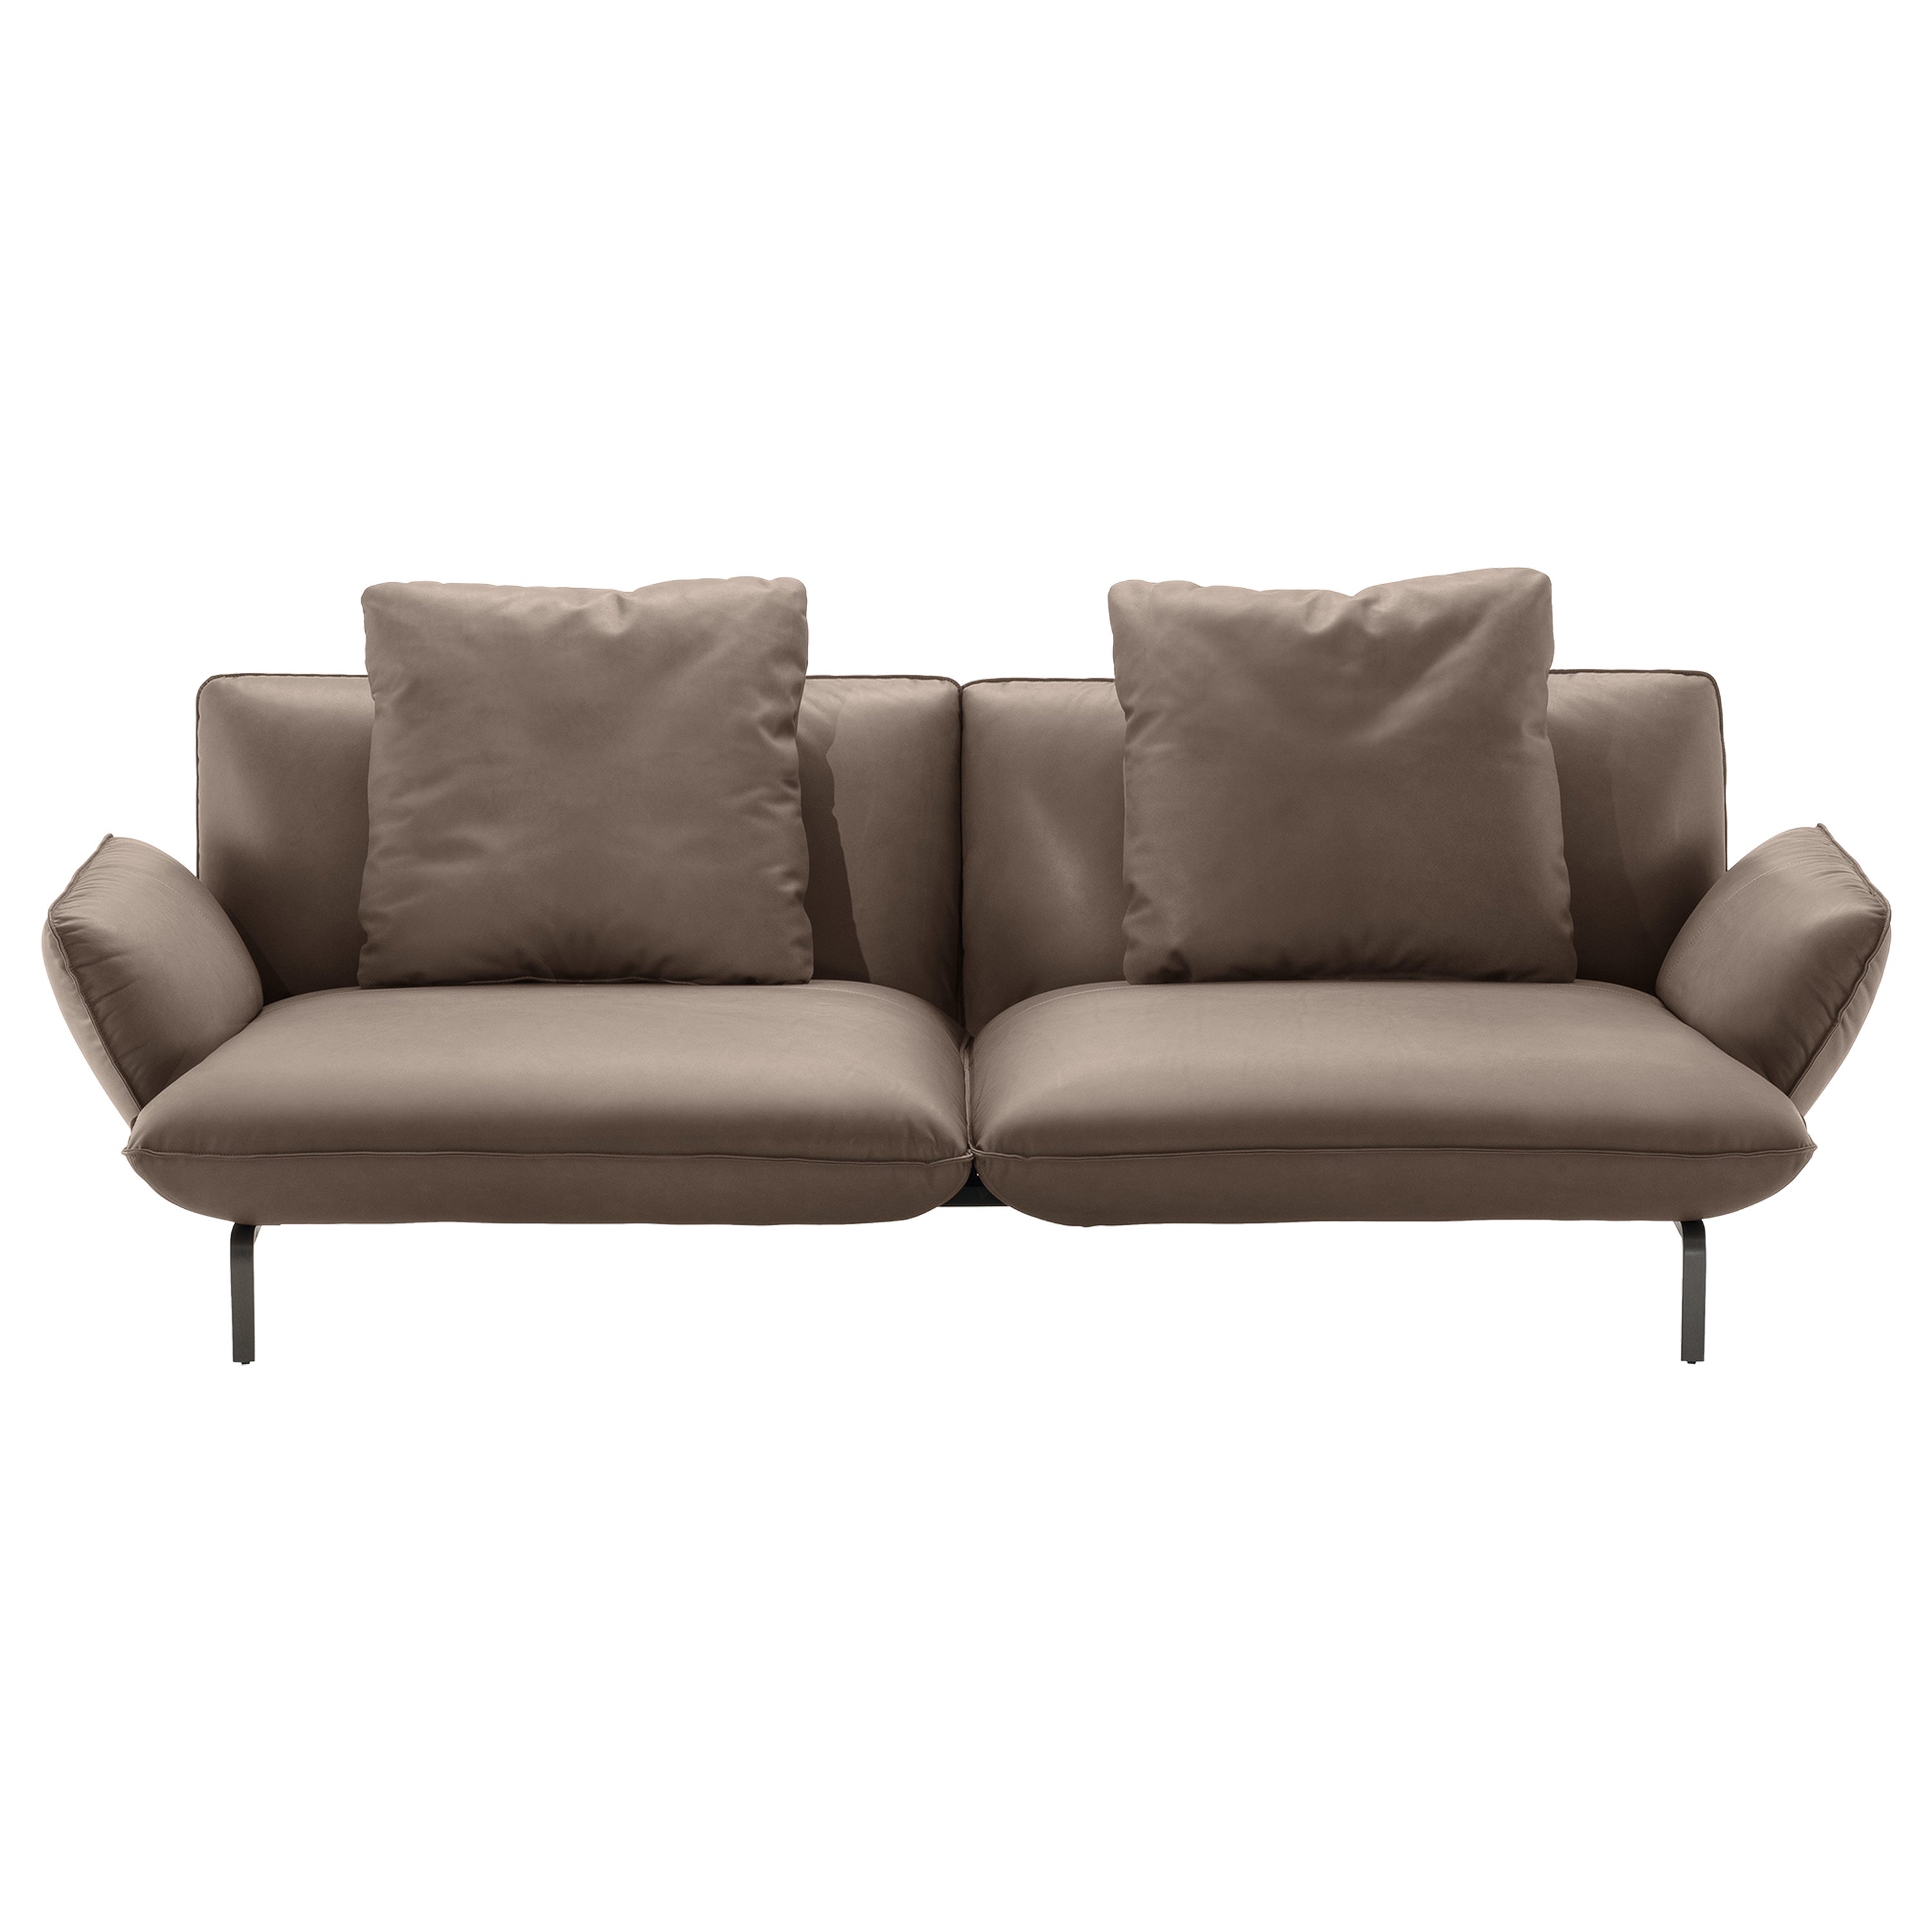 Zanotta Large Dove Sofa in Super Leather with Graphite Painted Aluminium Frame For Sale